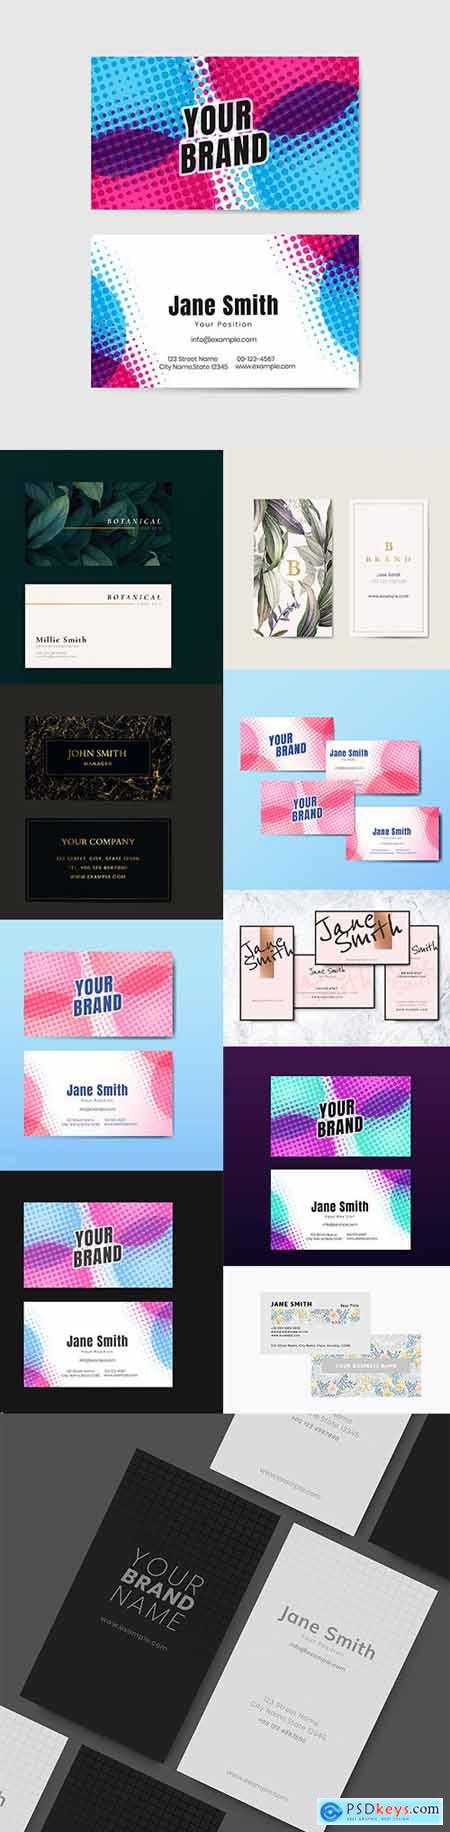 Set of Professional Business Card Templates vol4